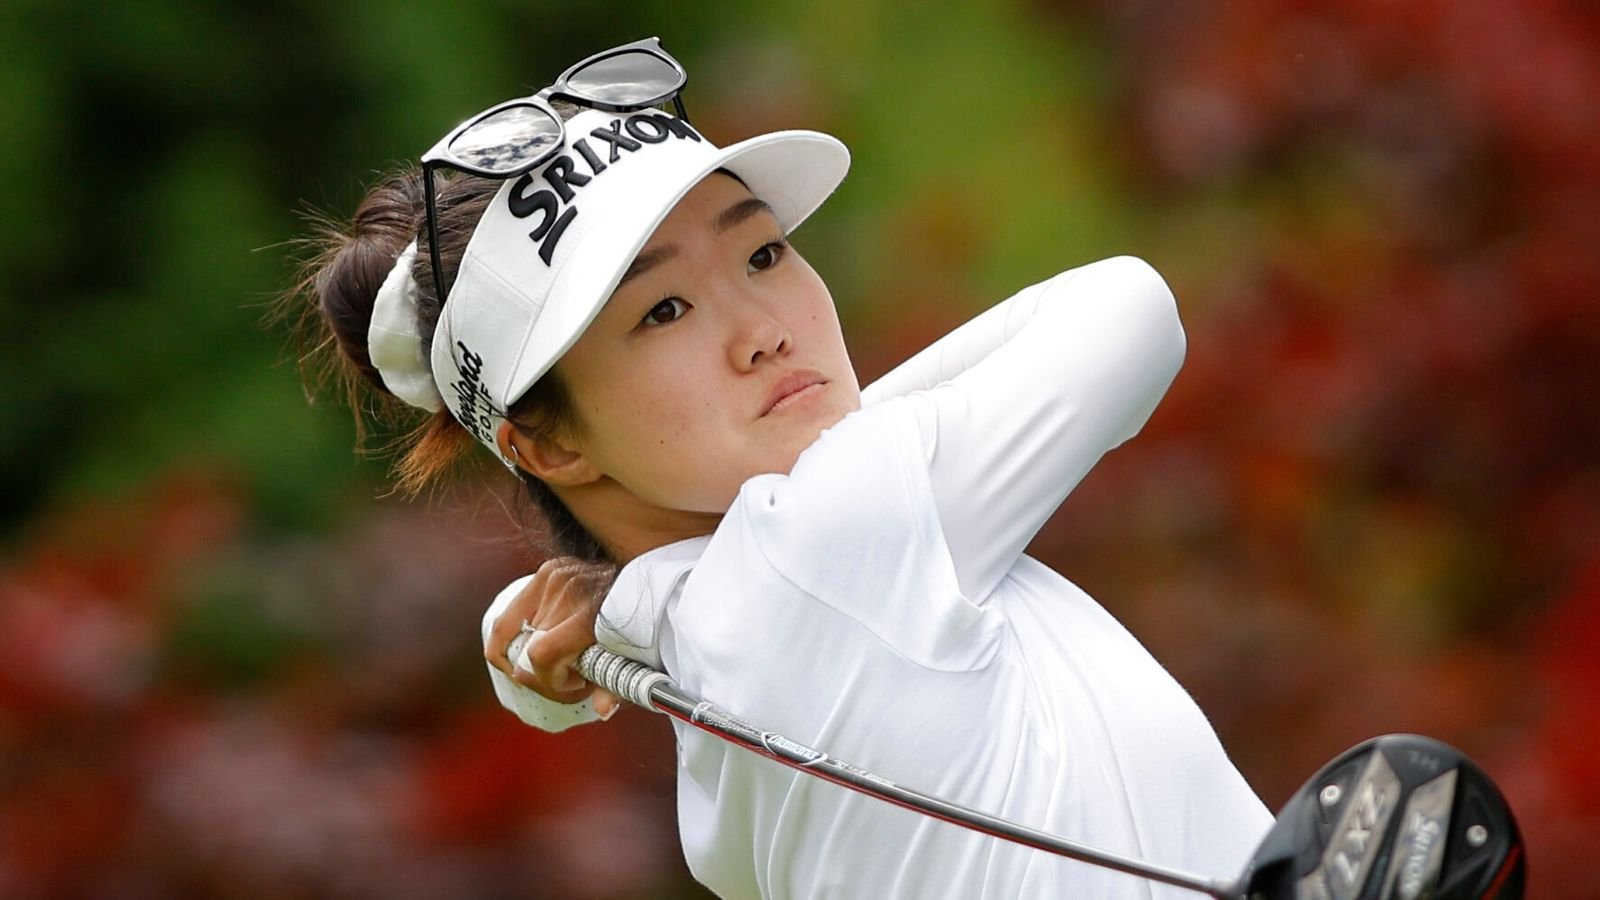 Grace Kim hole in one earns her team share of Dow Championship lead after second round | Golf News